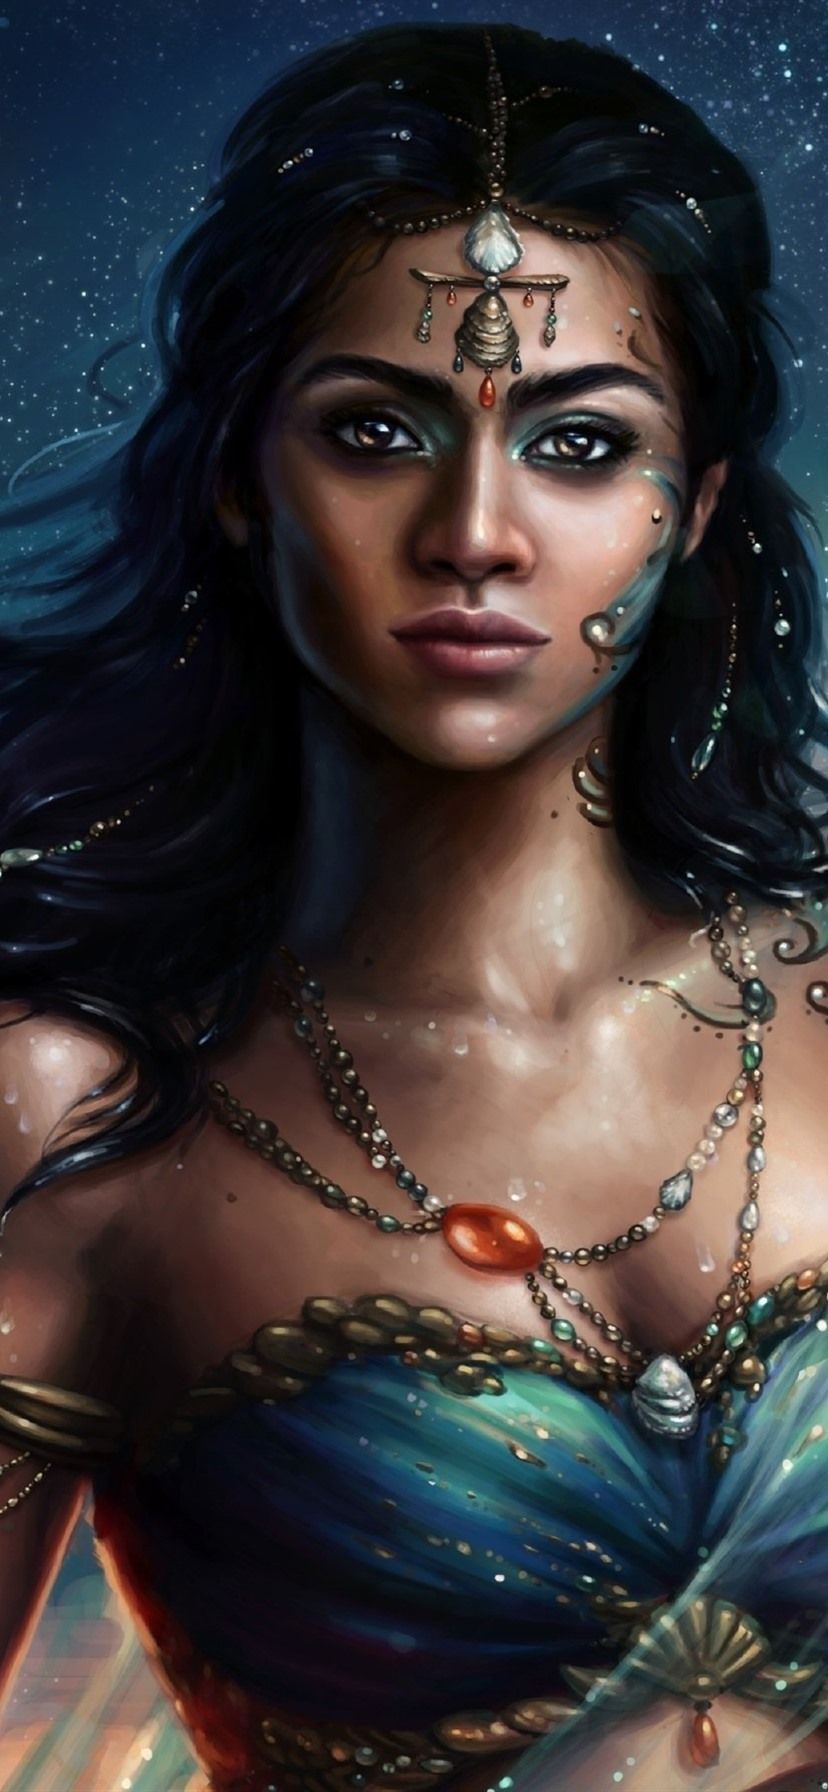 Indian Girl, Princesses, Stars, Fantasy Picture 828x1792 IPhone 11 XR Wallpaper, Background, Picture, Image